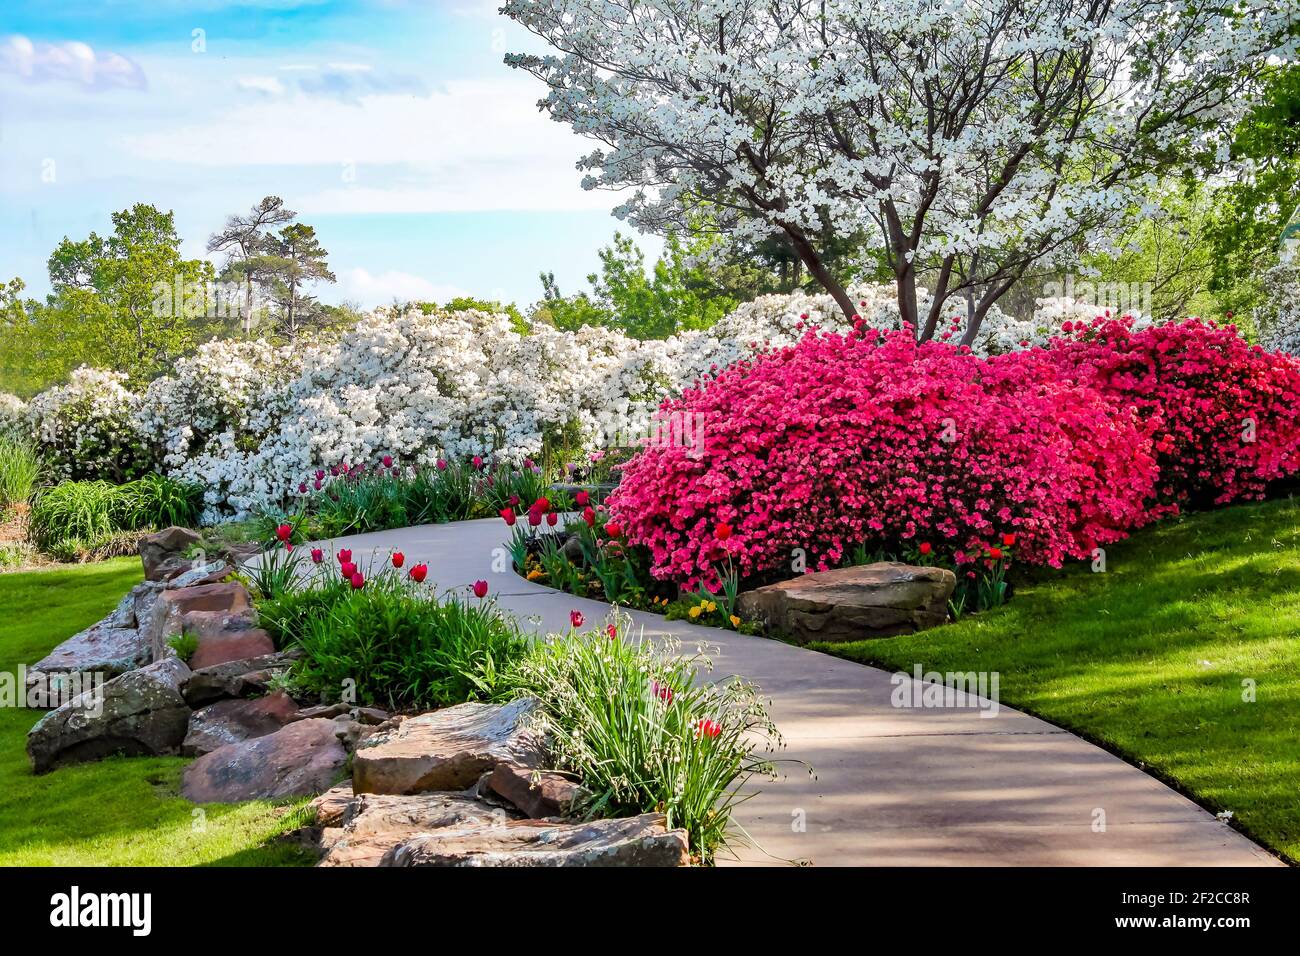 Curved path through banks of Azeleas and under dogwood trees with tulips under a blue sky - Beauty in nature Stock Photo